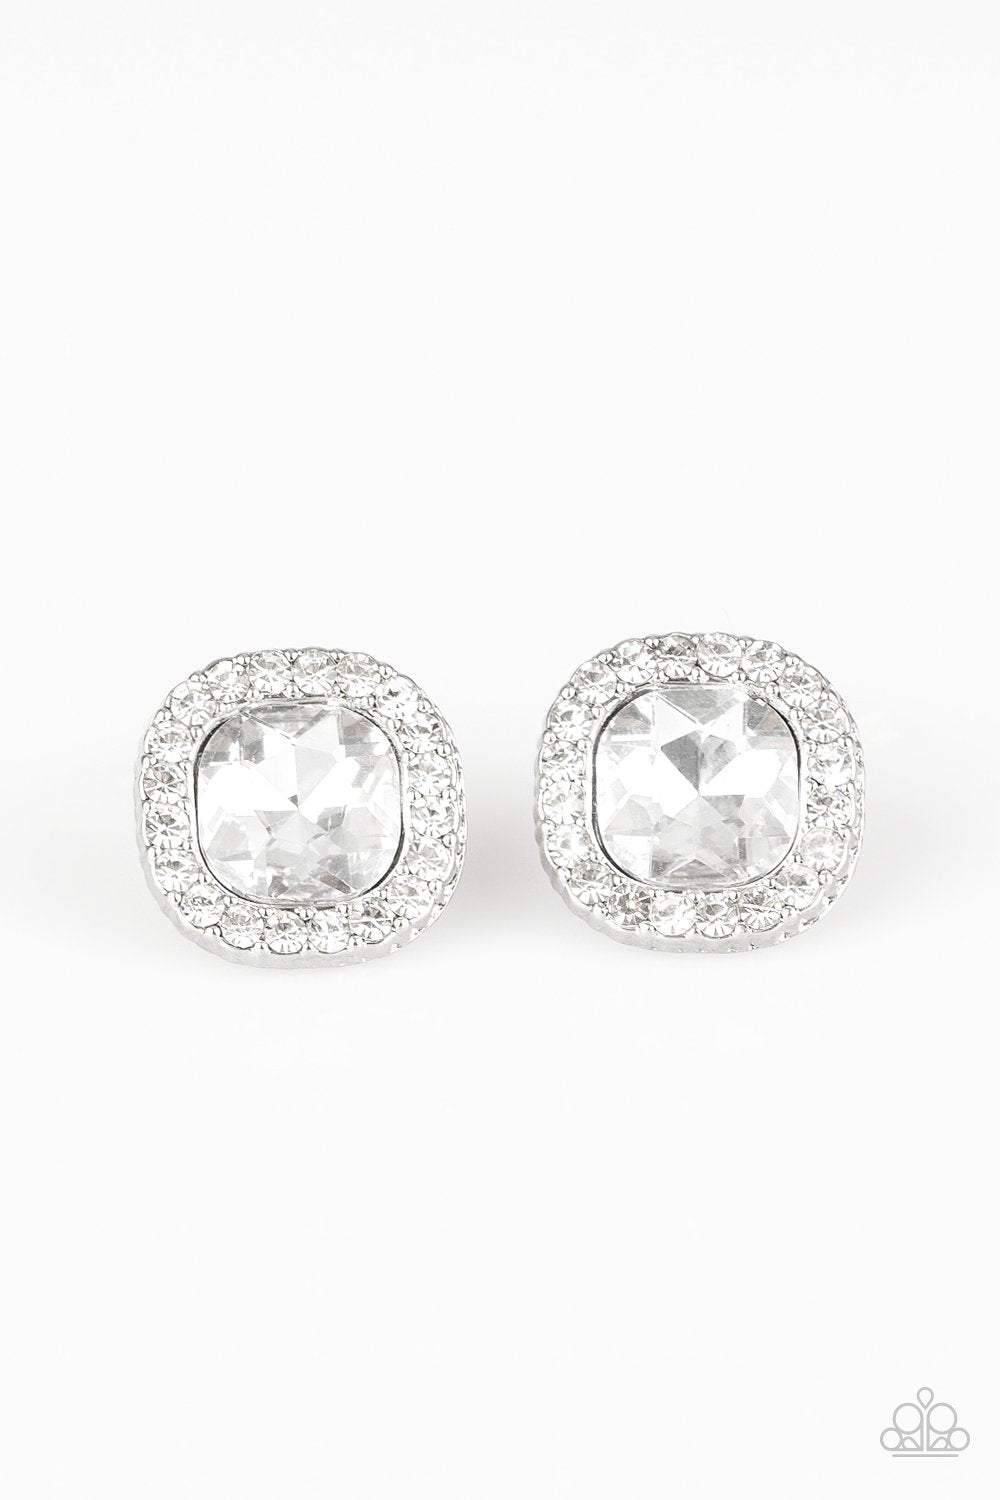 BLING-tastic! White Rhinestone Post Earrings - Paparazzi Accessories - lightbox -CarasShop.com - $5 Jewelry by Cara Jewels